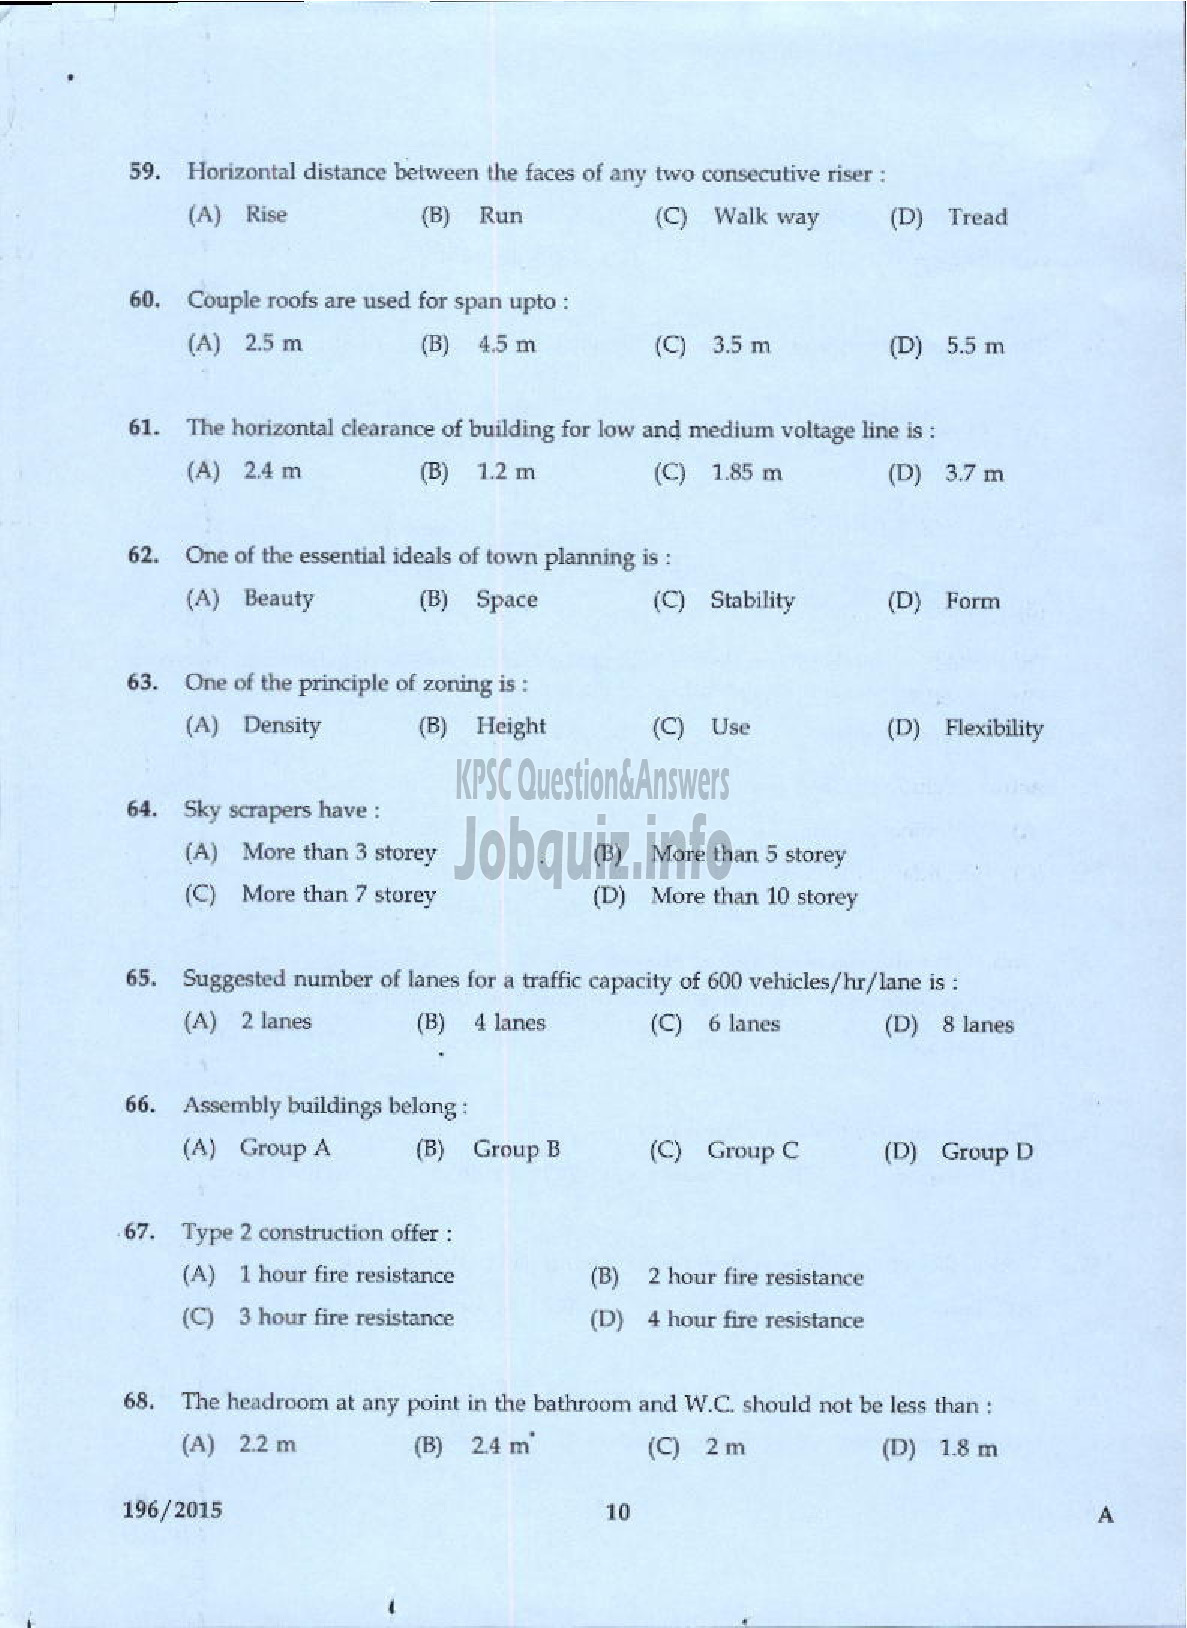 Kerala PSC Question Paper - DRAFTSMAN GR I/ TOWN PLANNING SURVEYOR GR I TOWN AND COUNTRY PLANNING-8